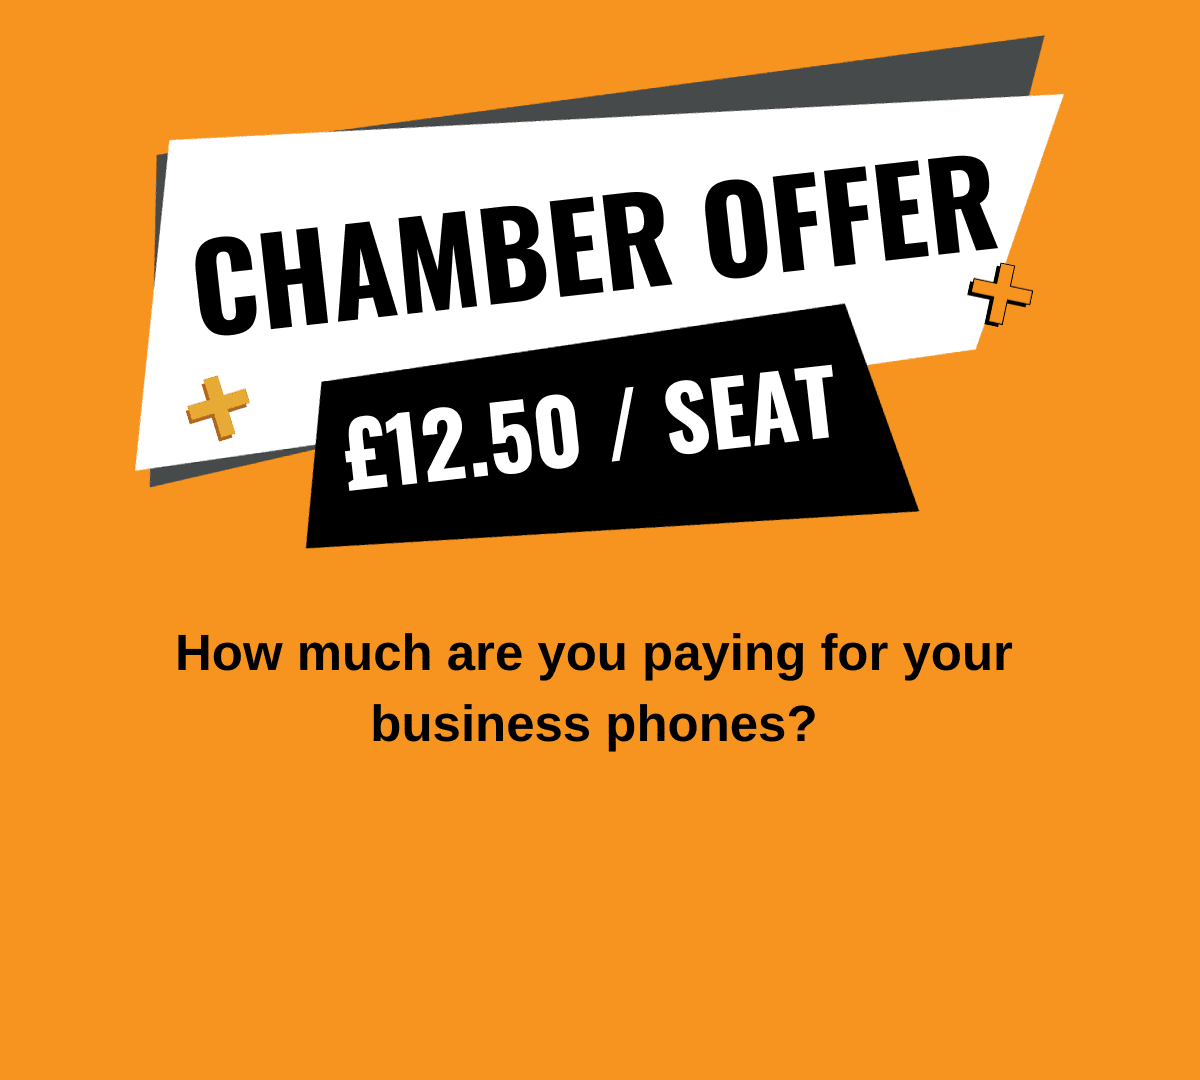 Are You Happy With Your Business Phones? | £12.50/seat Offer | Northamptonshire Chamber of Commerce